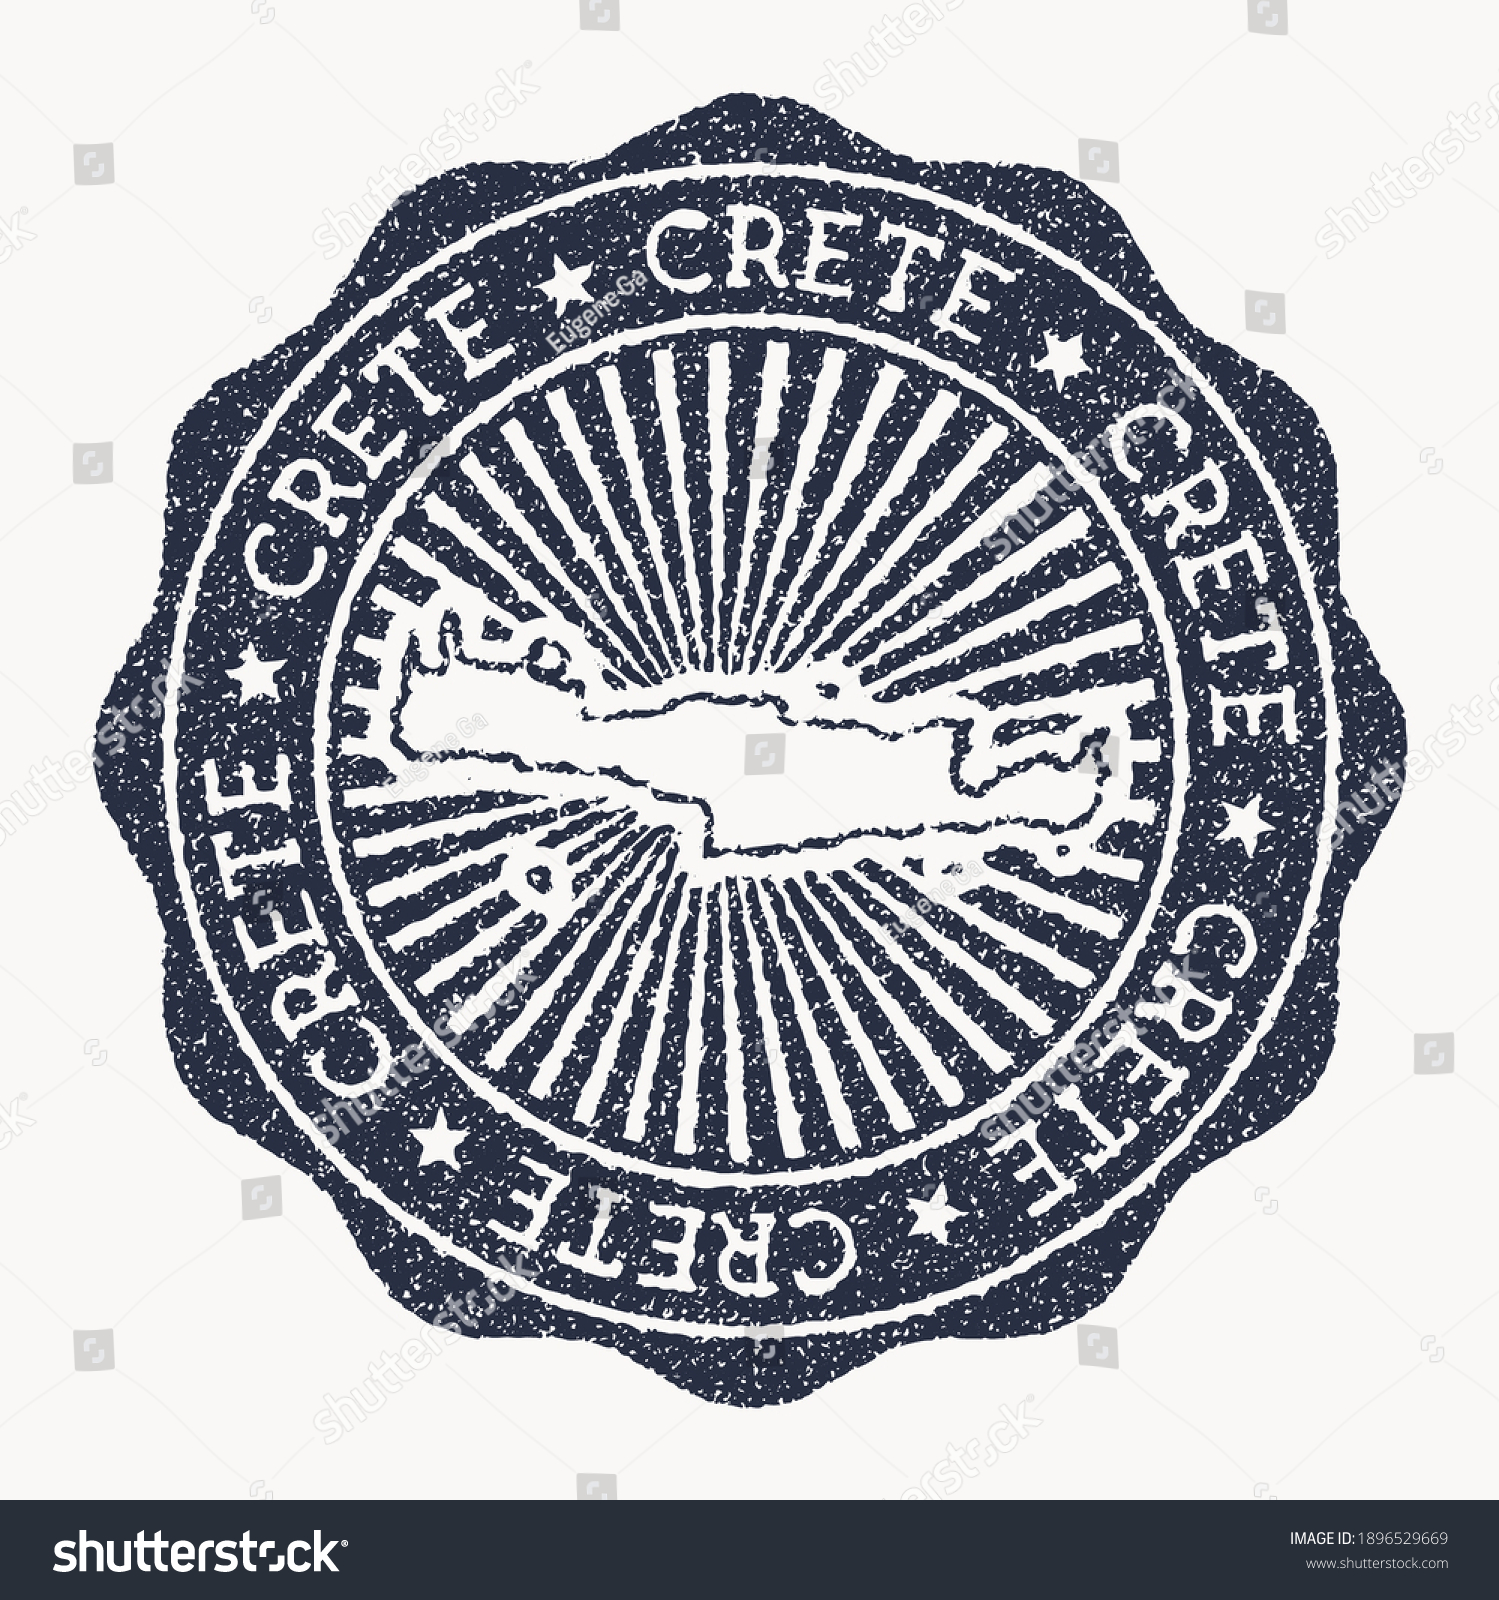 SVG of Crete stamp. Travel rubber stamp with the name and map of island, vector illustration. Can be used as insignia, logotype, label, sticker or badge of the Crete. svg